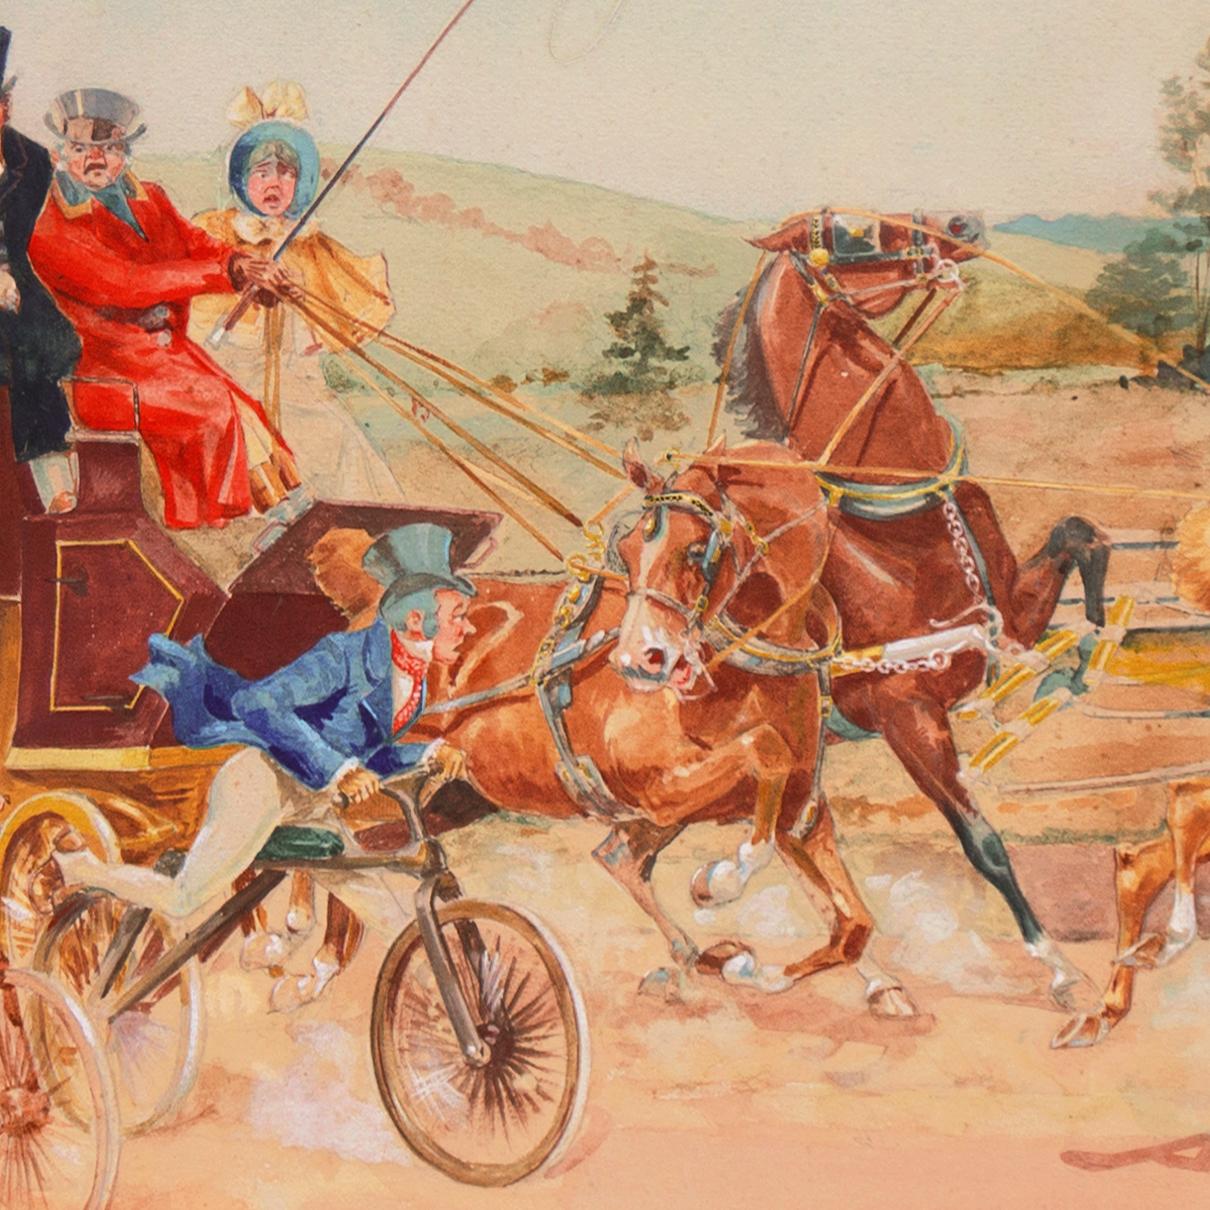 Signed lower right, 'George H Harrington' (American, 1833-1911) and painted circa 1900.

A substantial and animated coaching scene enlivened by the artist's acute and humorous observation of character and fine equestrian painting.

Born in